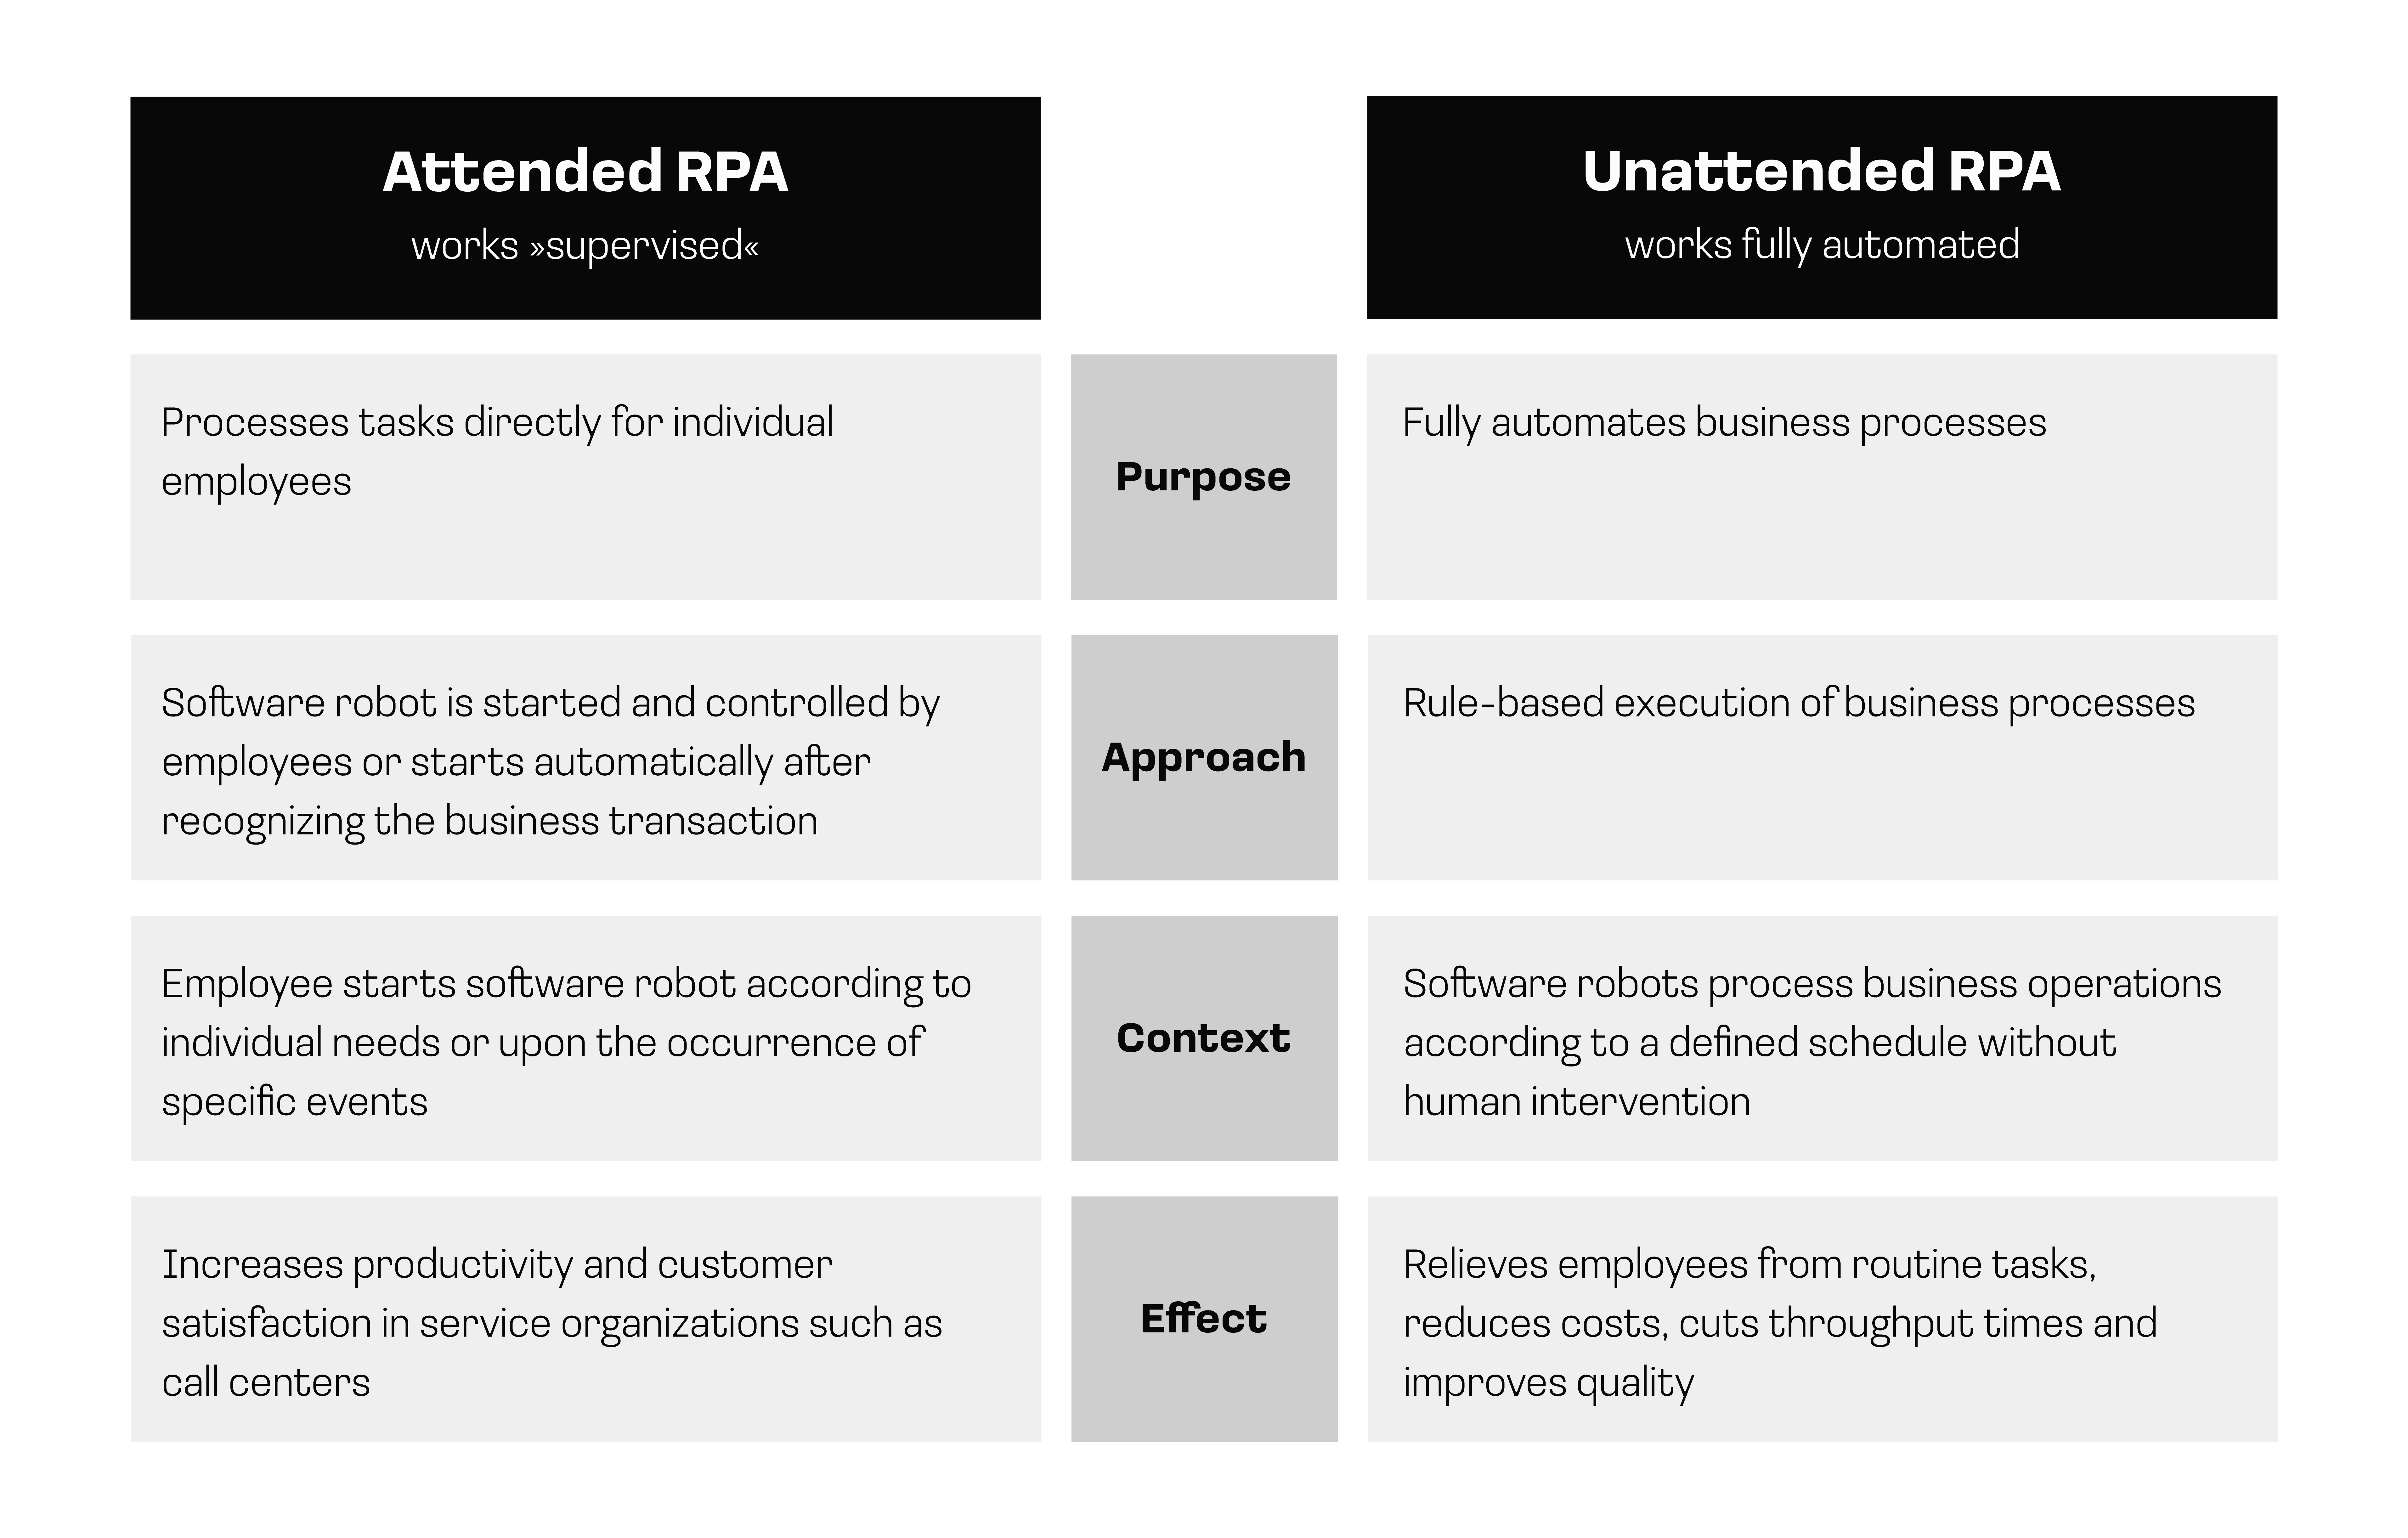 Attended RPA and Unattended in comparison: Attended RPA: Processes tasks directly for individual employees. The bot is started by the employee according to individual requirements or starts automatically when a certain event occurs. It is used to increase productivity and customer satisfaction, e.g. in call centers. Unattended RPA: Handles business processes fully automatically. It works rule-based and according to a defined schedule. It relieves employees of routine tasks, which reduces costs and improves quality.